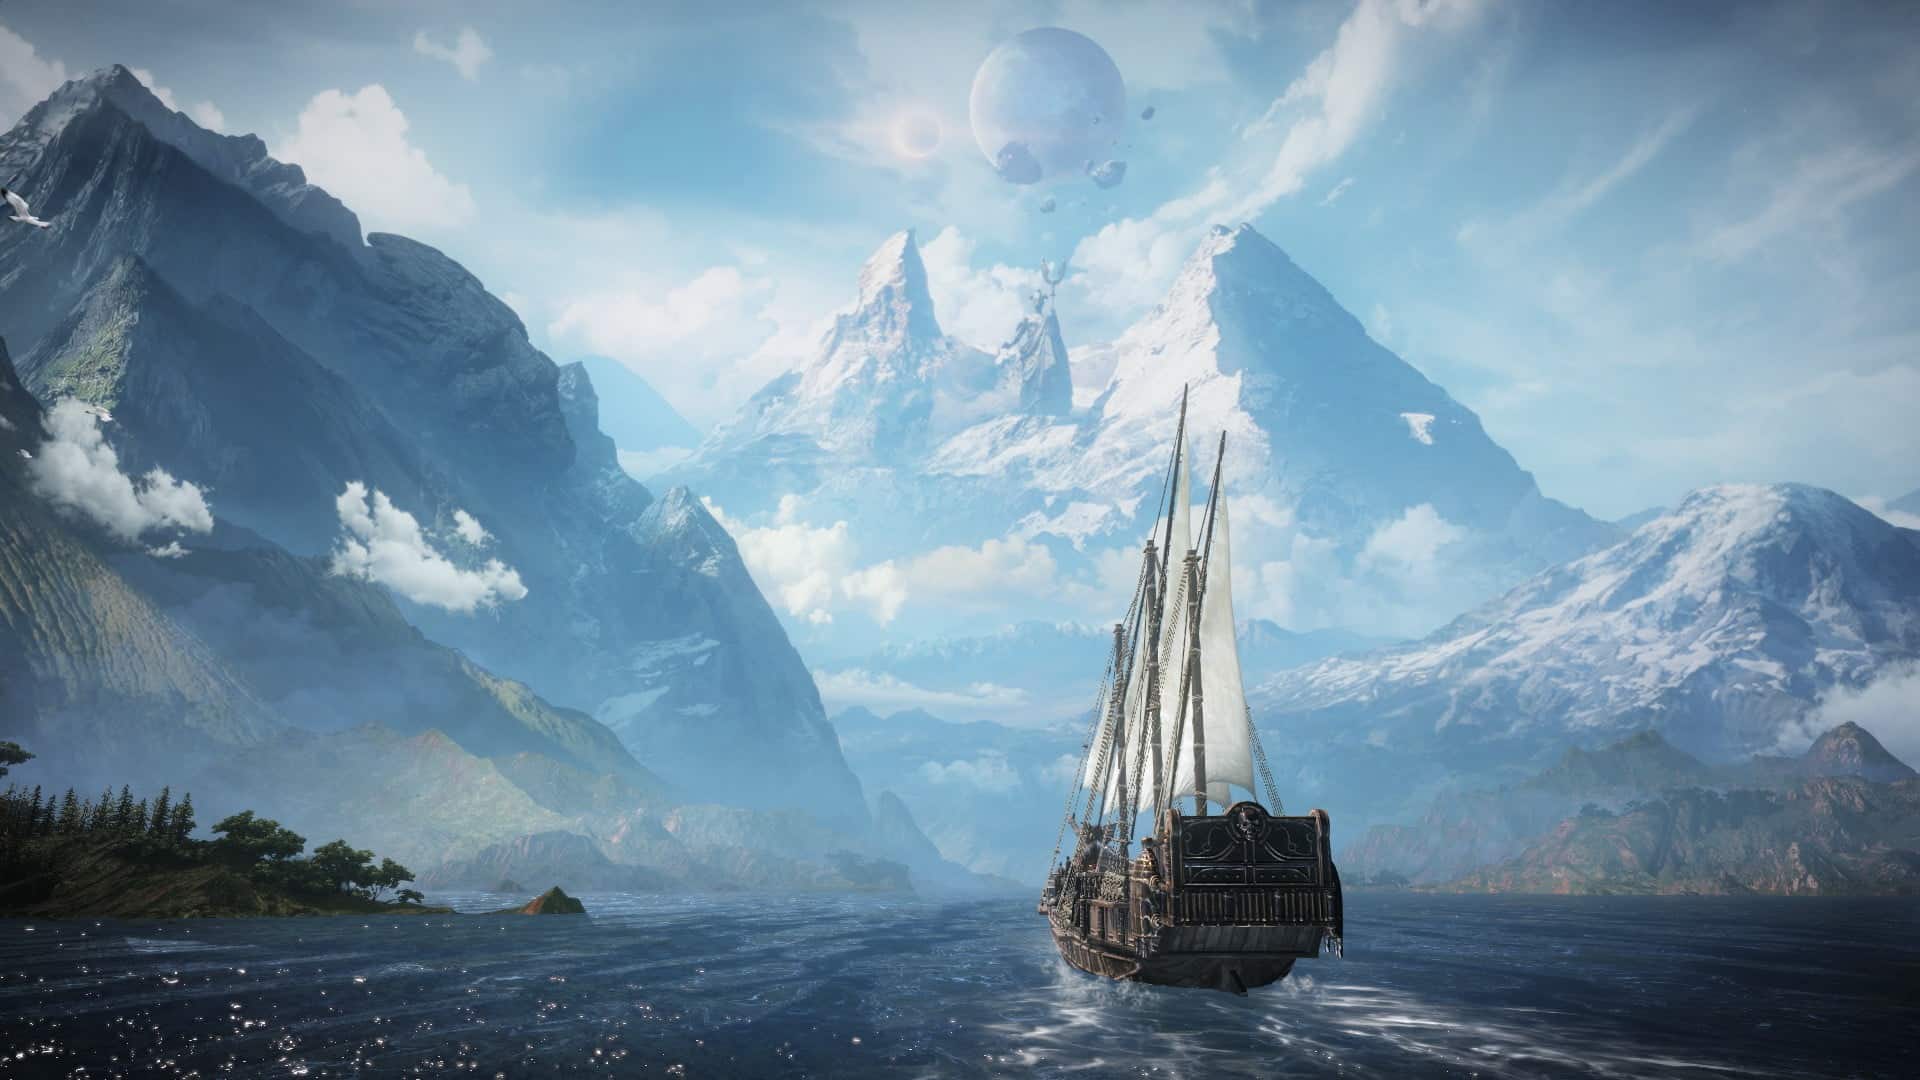 lost ark ship sails towards mountains